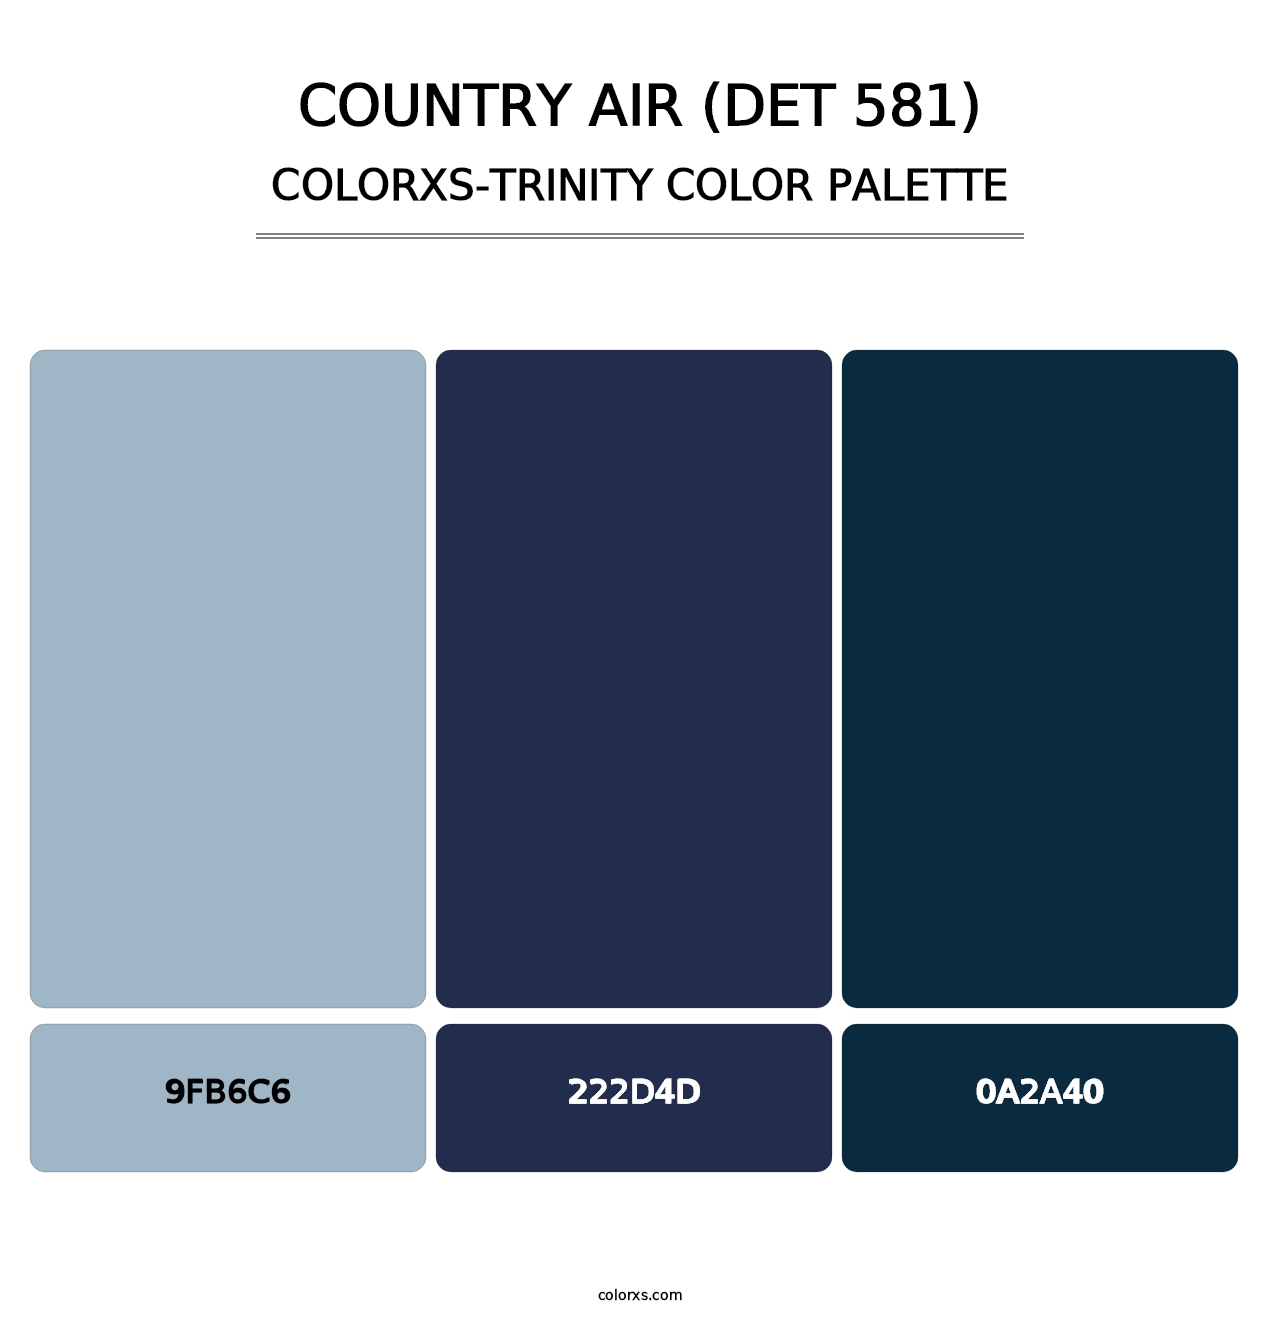 Country Air (DET 581) - Colorxs Trinity Palette